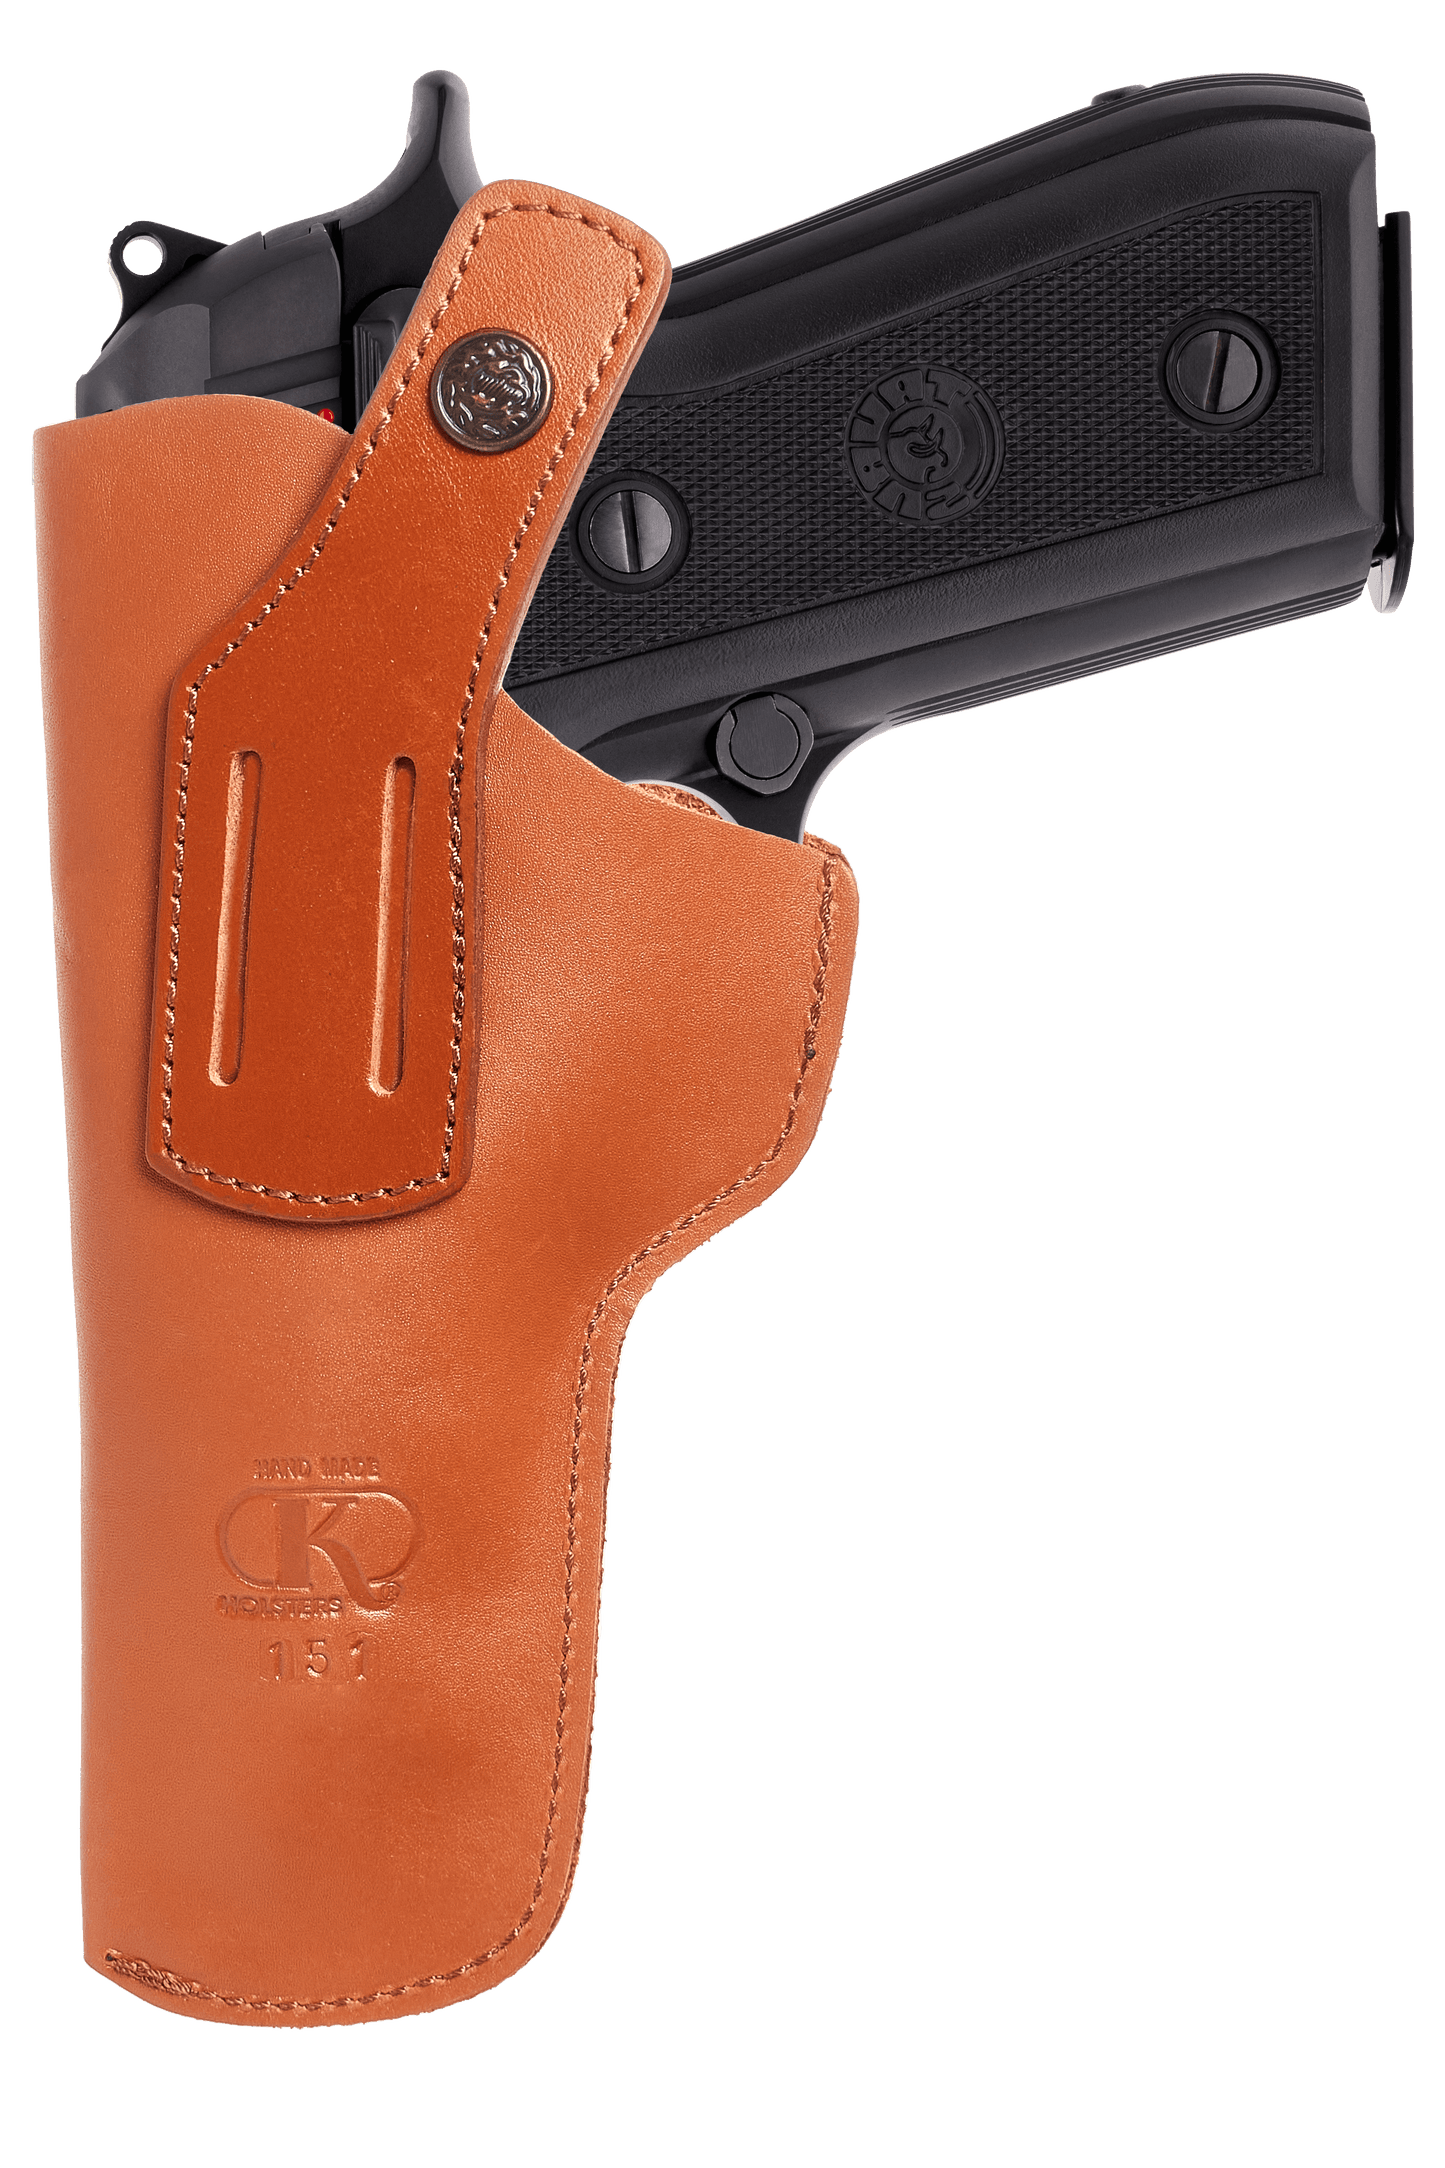 Beretta 92F IWB Leather Holster for Beretta 92 92S 92FS | S&W M&P Shield and Similar Sized Handguns, Concealed Carry Holster with Belt Clip (K151)